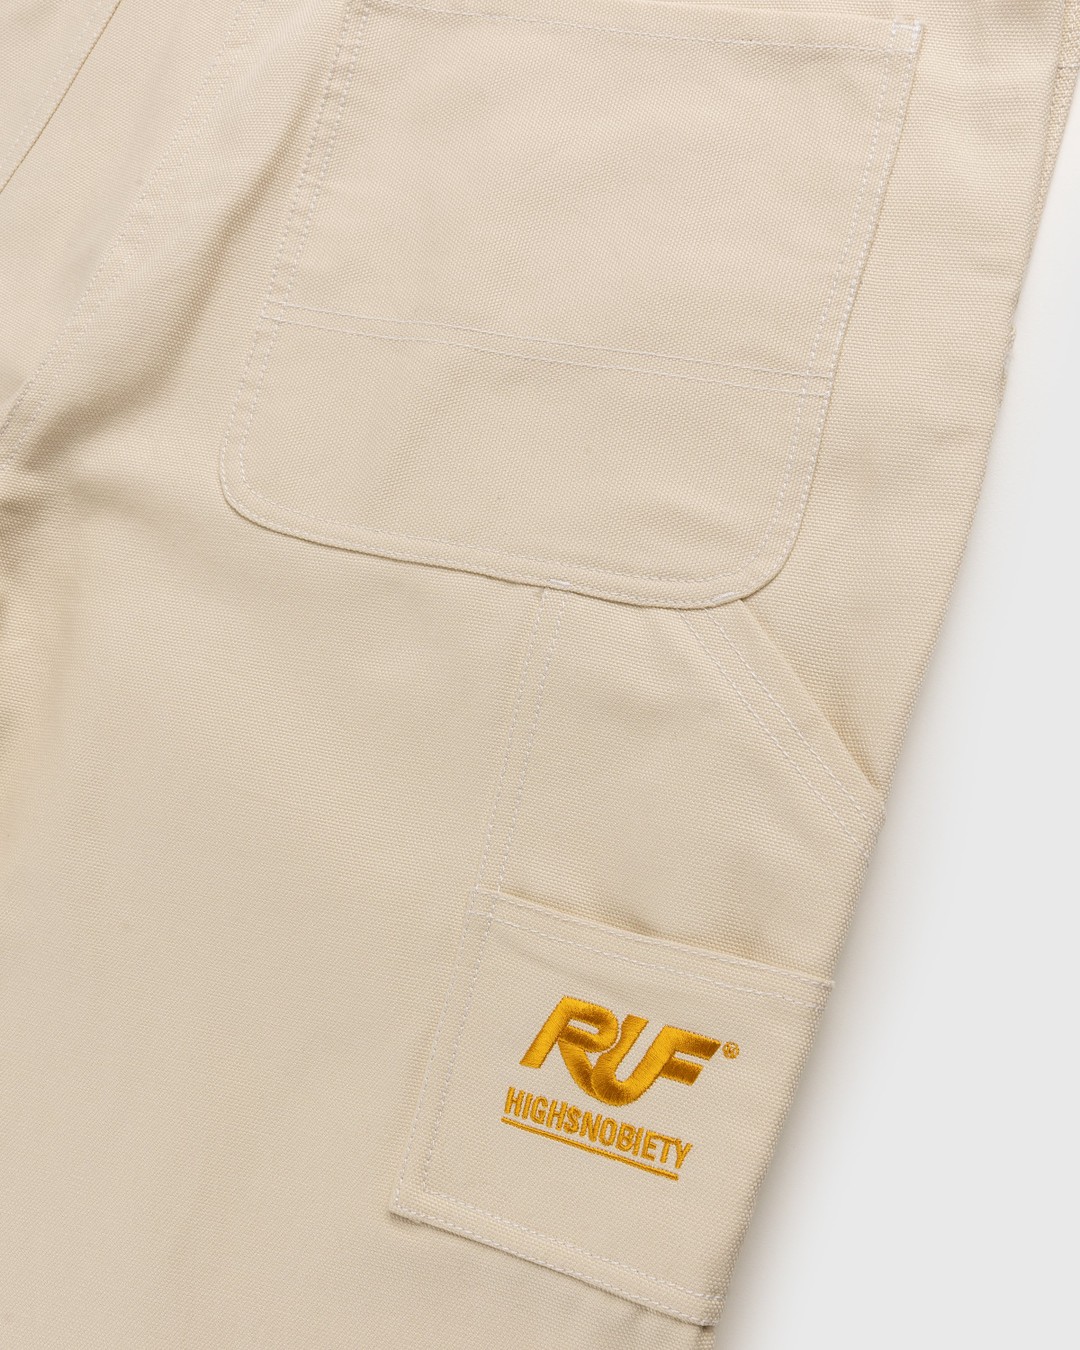 RUF x Highsnobiety – Cotton Overalls Natural - Trousers - Beige - Image 4